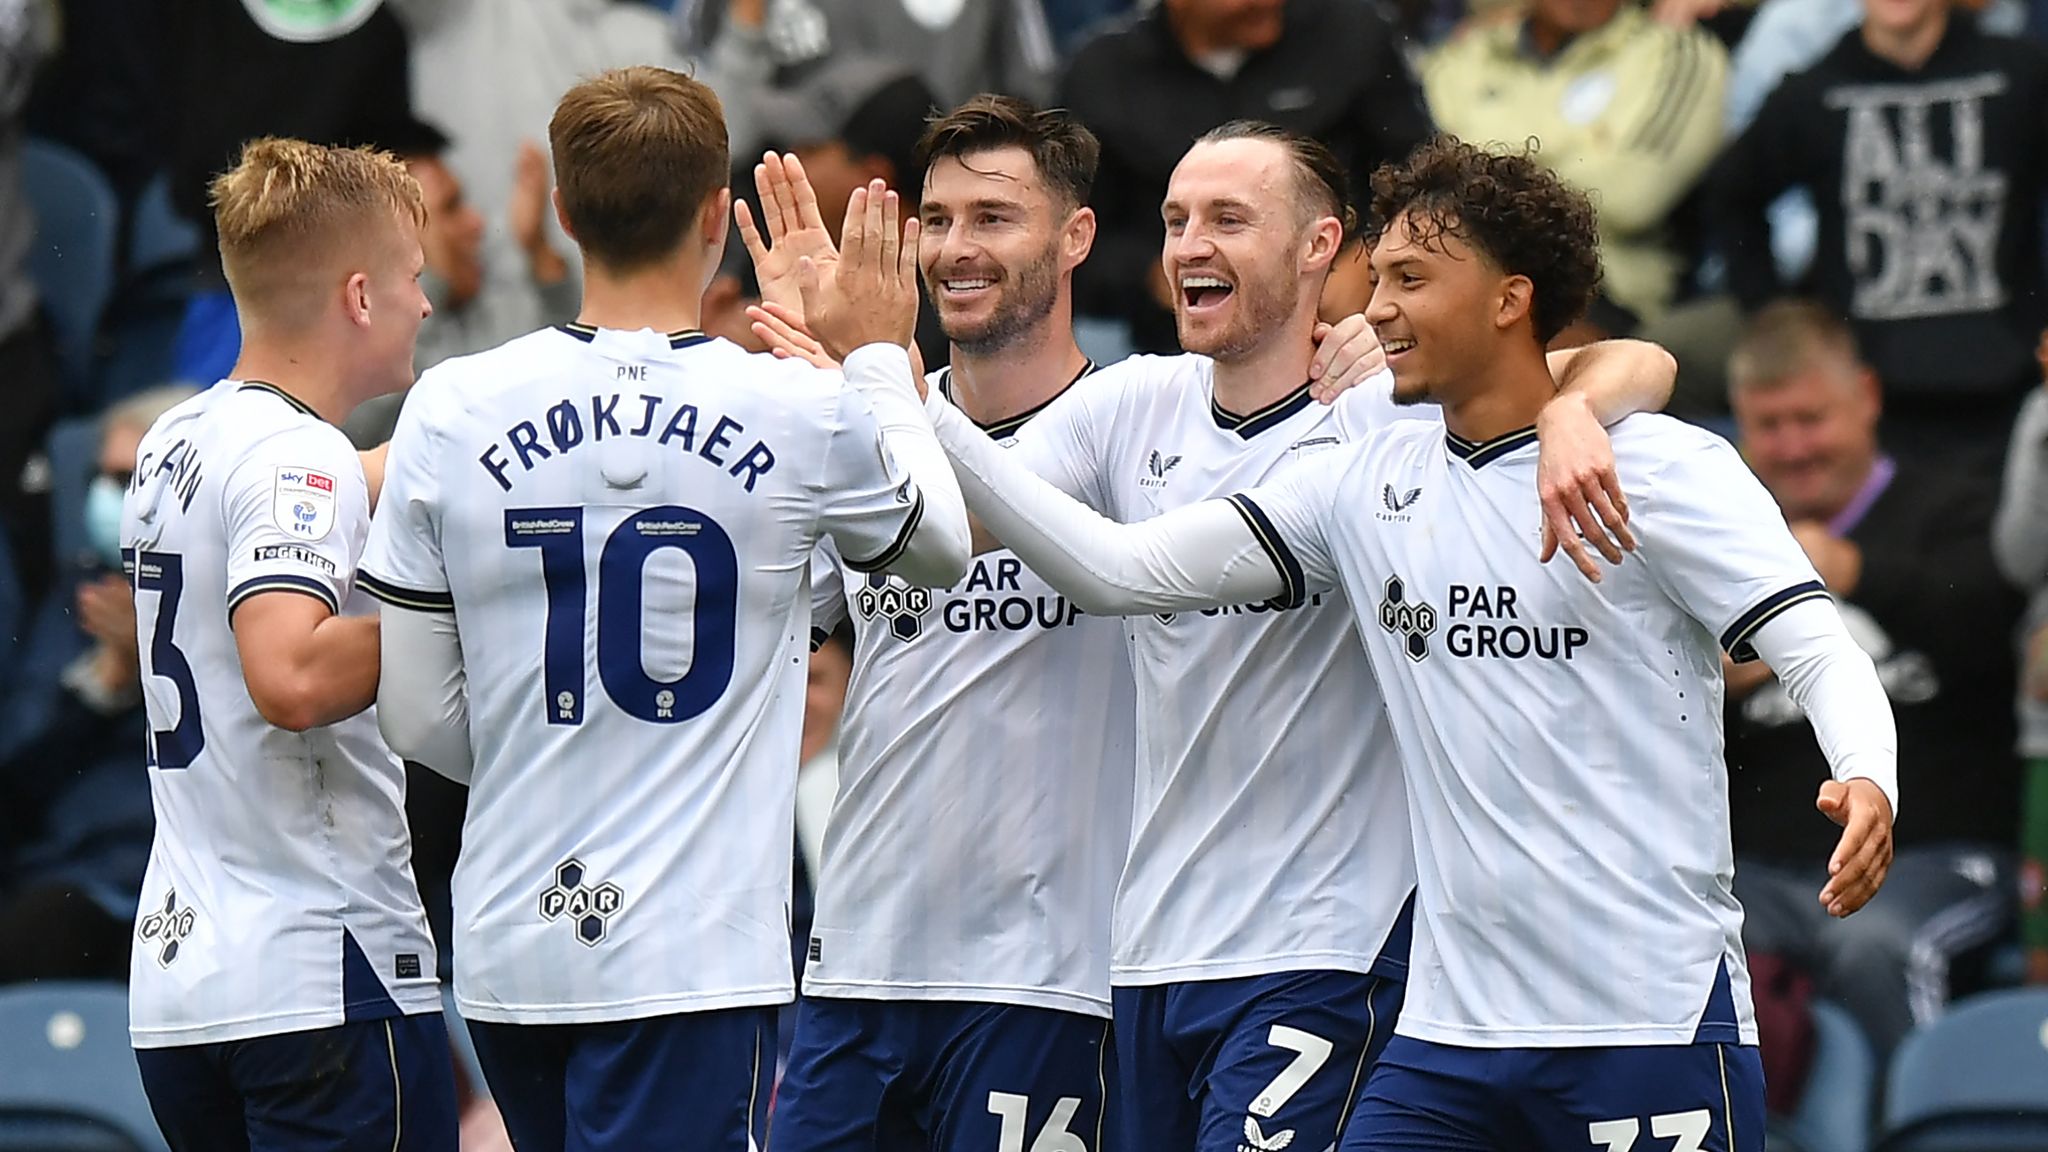 Championship table-toppers Preston come from behind to beat